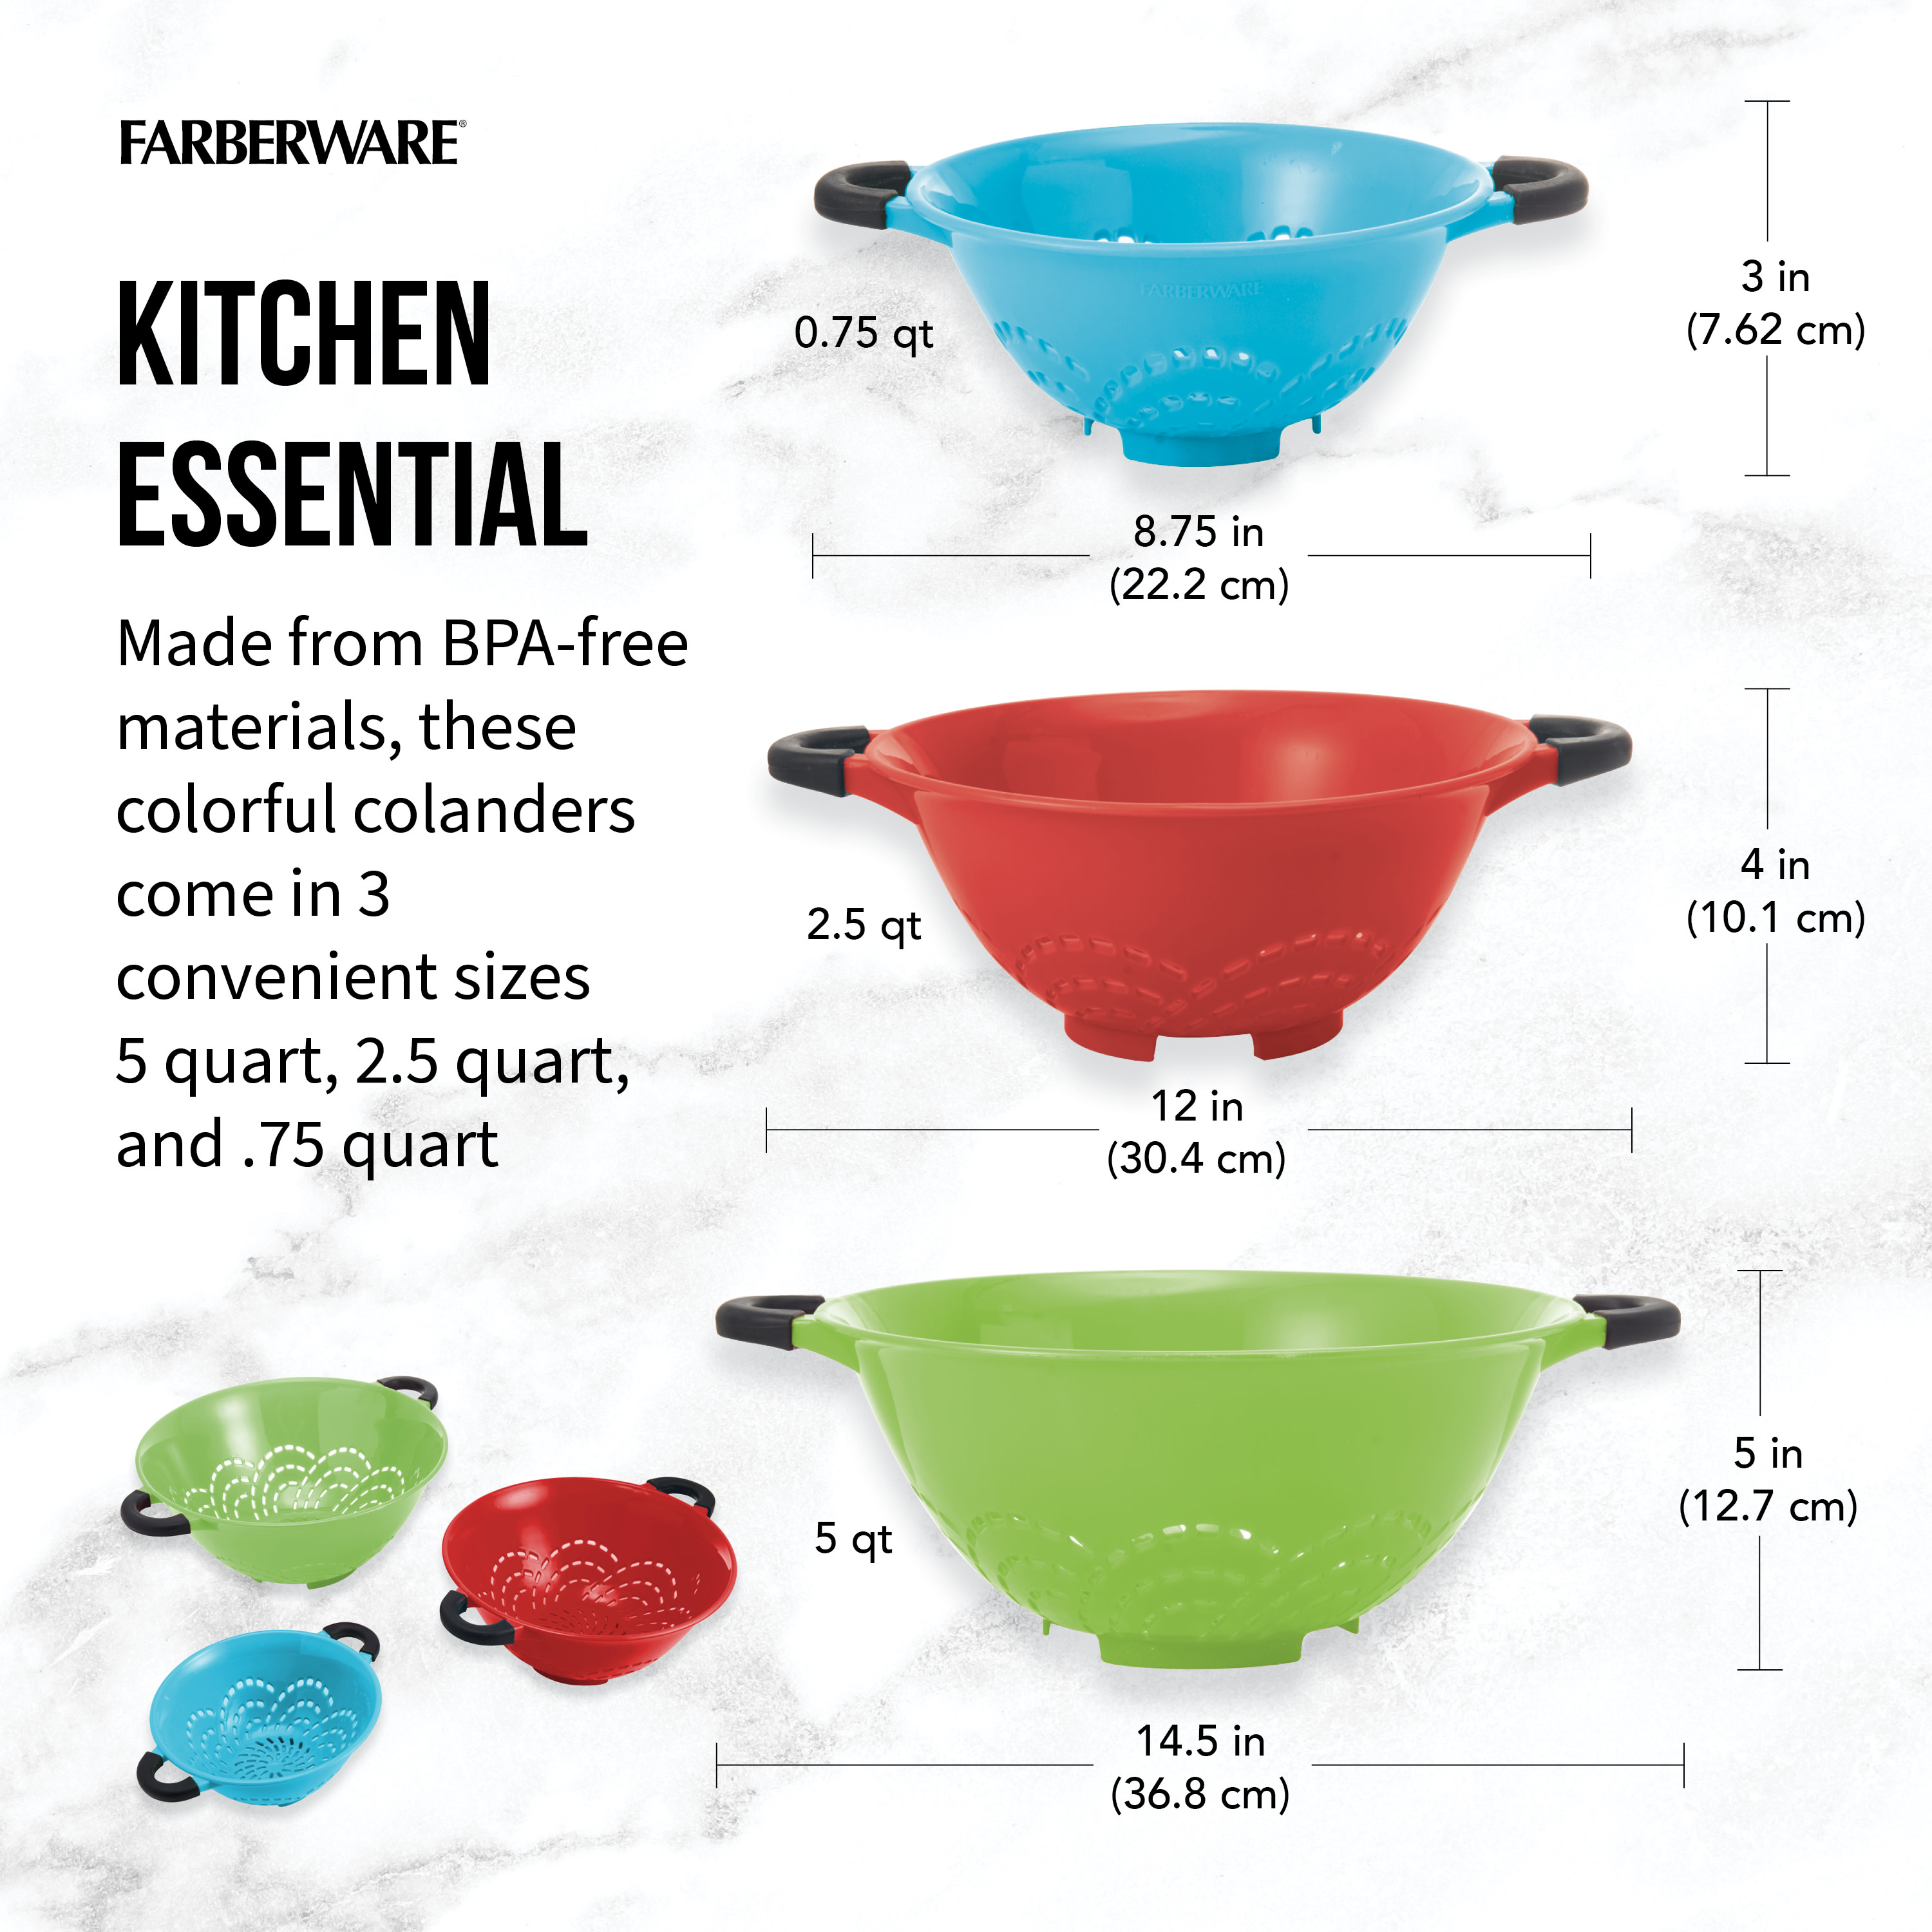 Farberware Professional Soft Grips Set of 3 Strainer Colanders Multi-Color - image 4 of 10